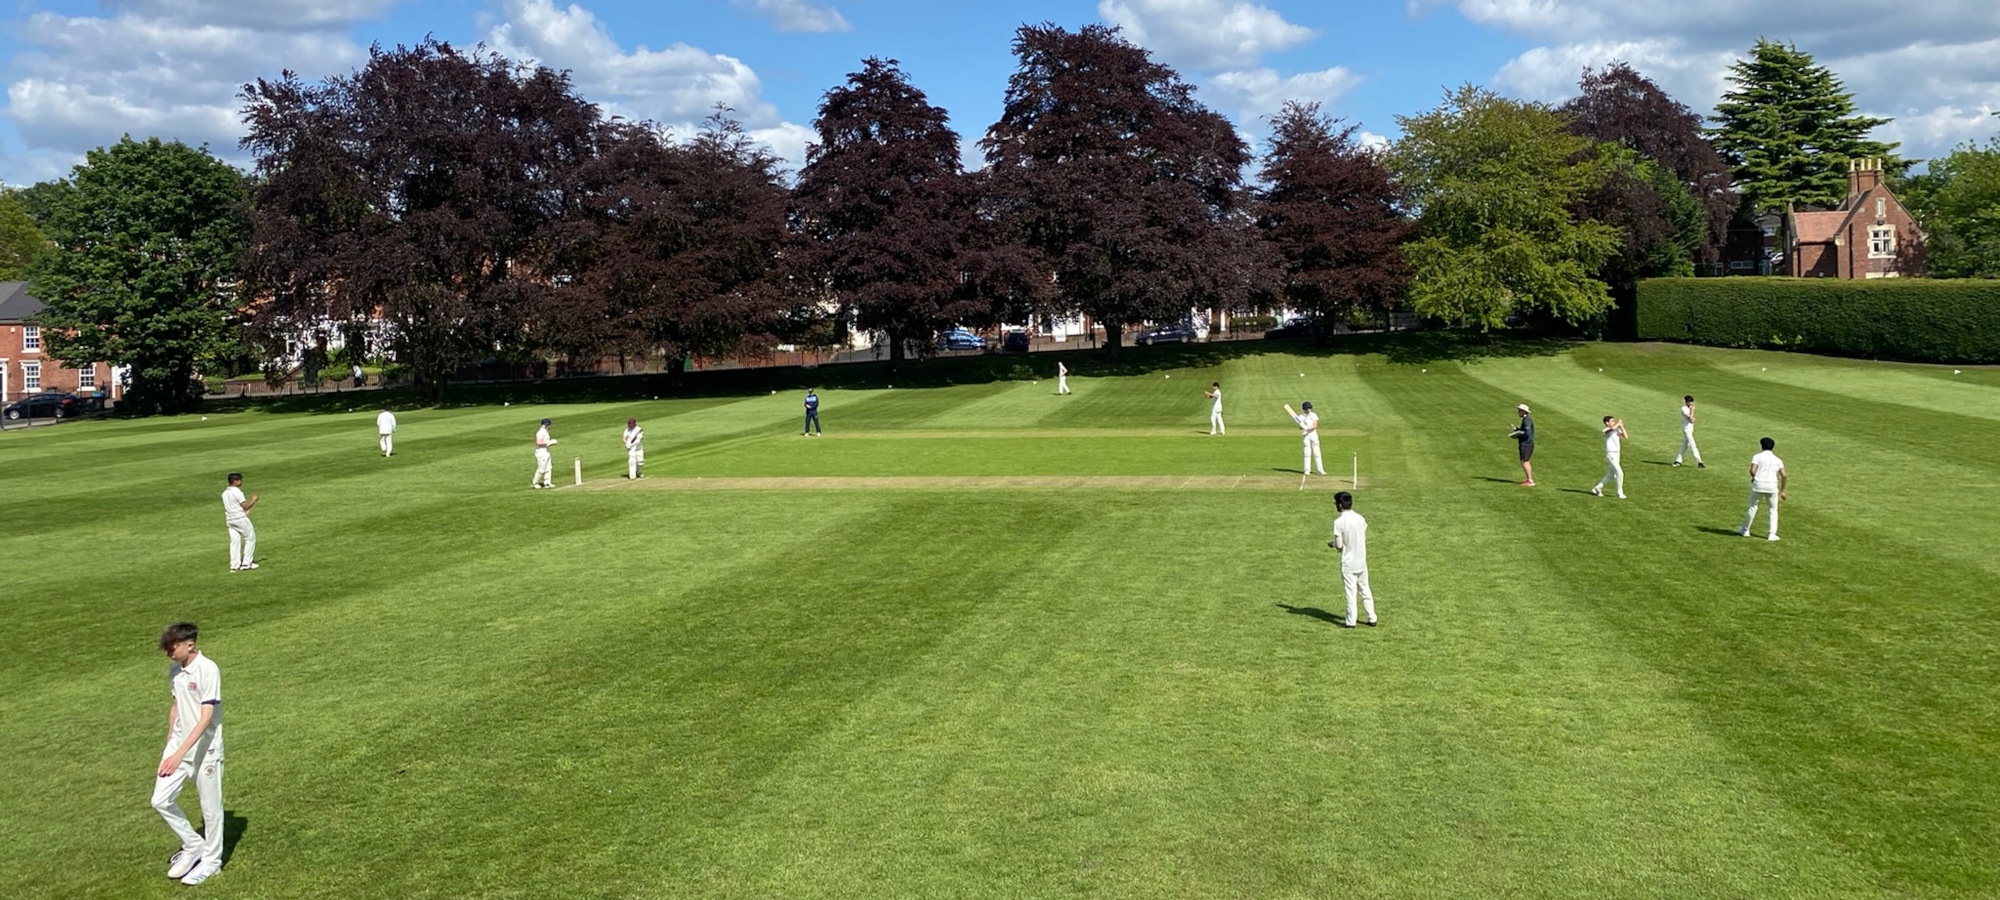 cricket field in glorious summer sunshine with two boys teams playing a match and dark purple trees in the background